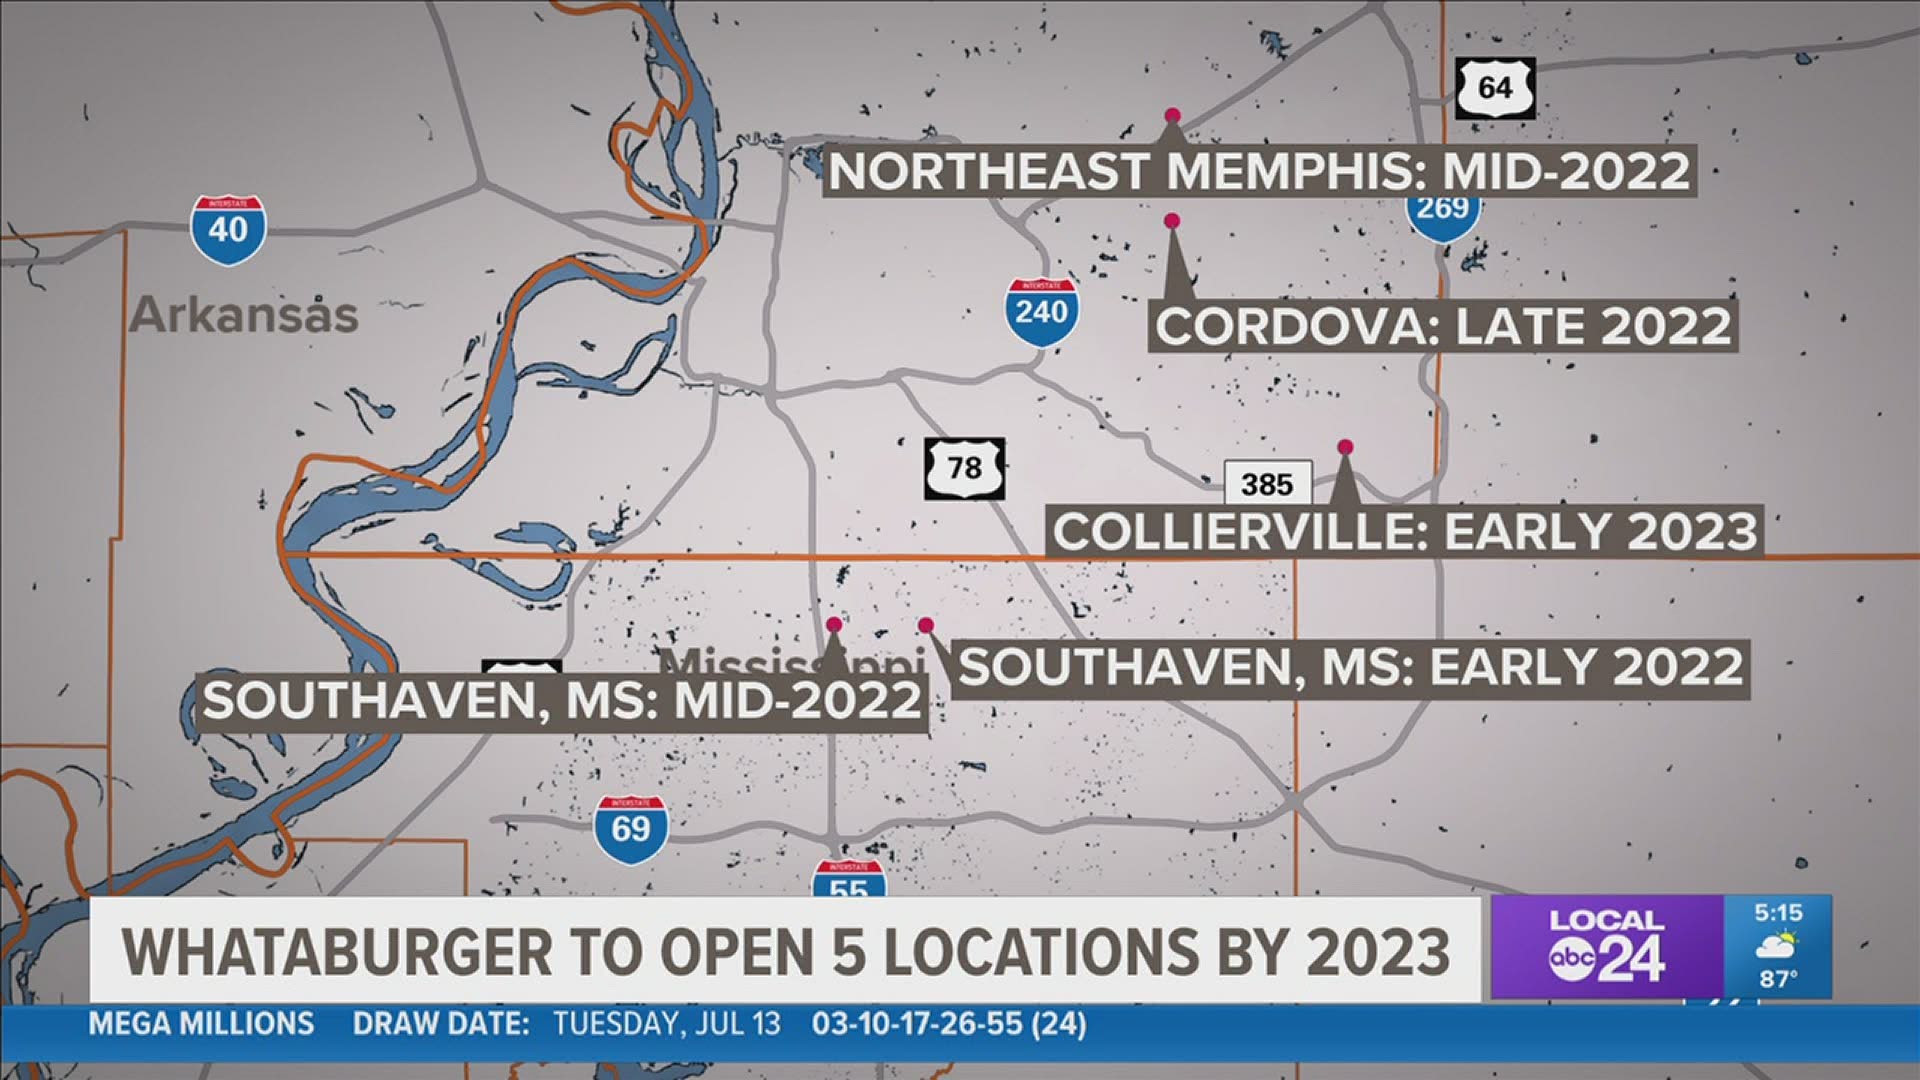 Whataburger announced it is planning to open a total of 5 locations across the Mid-South by early 2023.